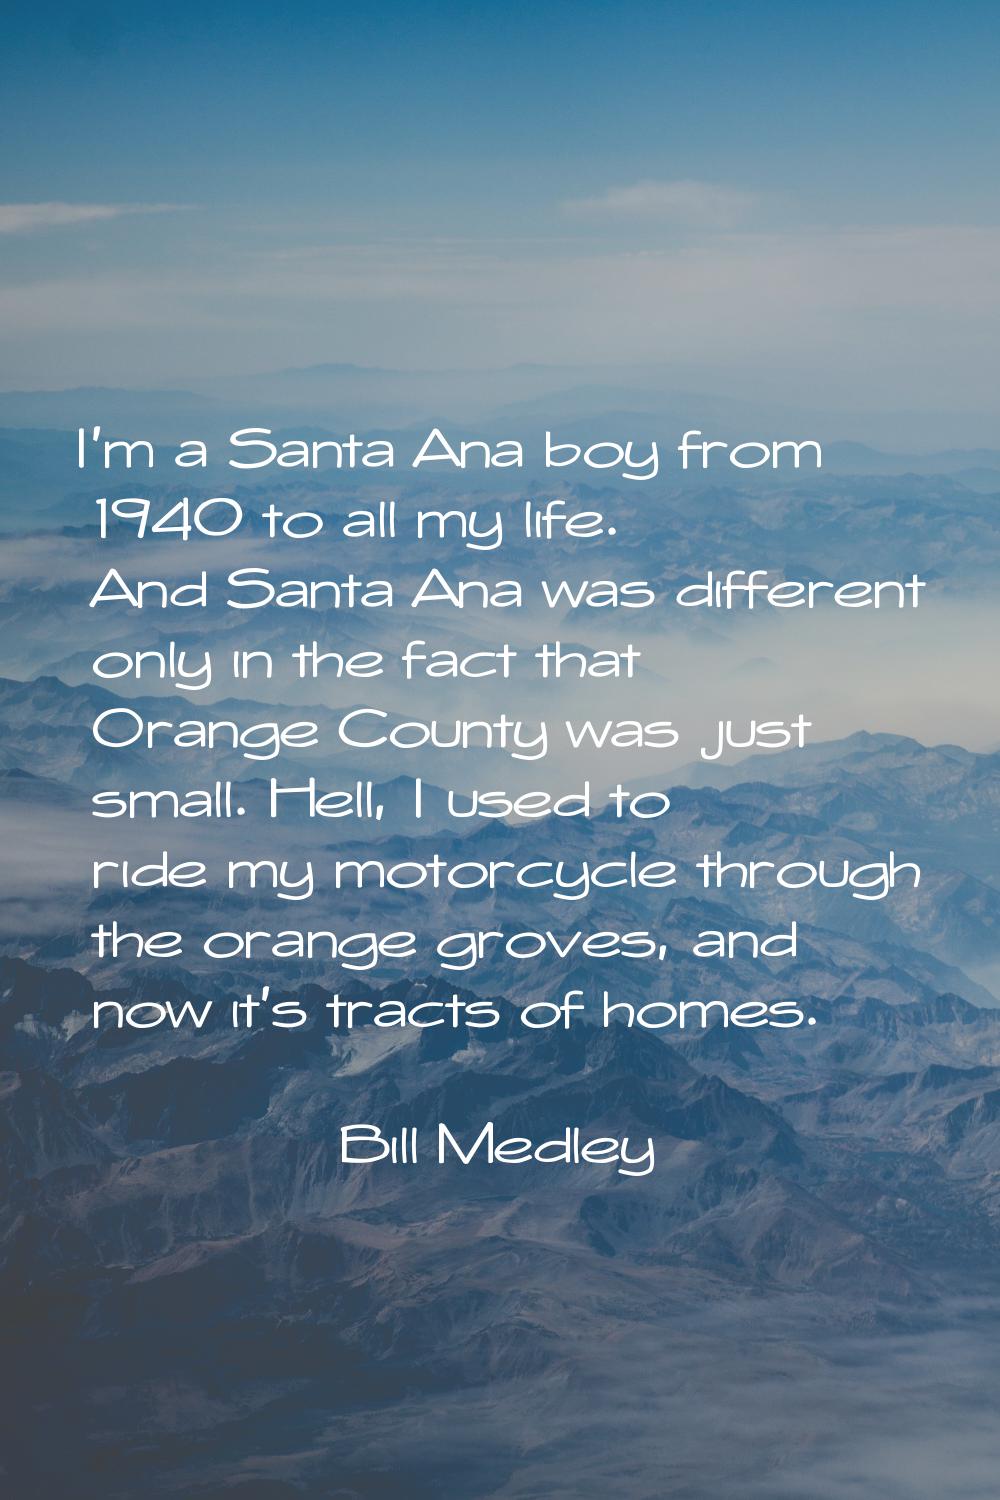 I'm a Santa Ana boy from 1940 to all my life. And Santa Ana was different only in the fact that Ora